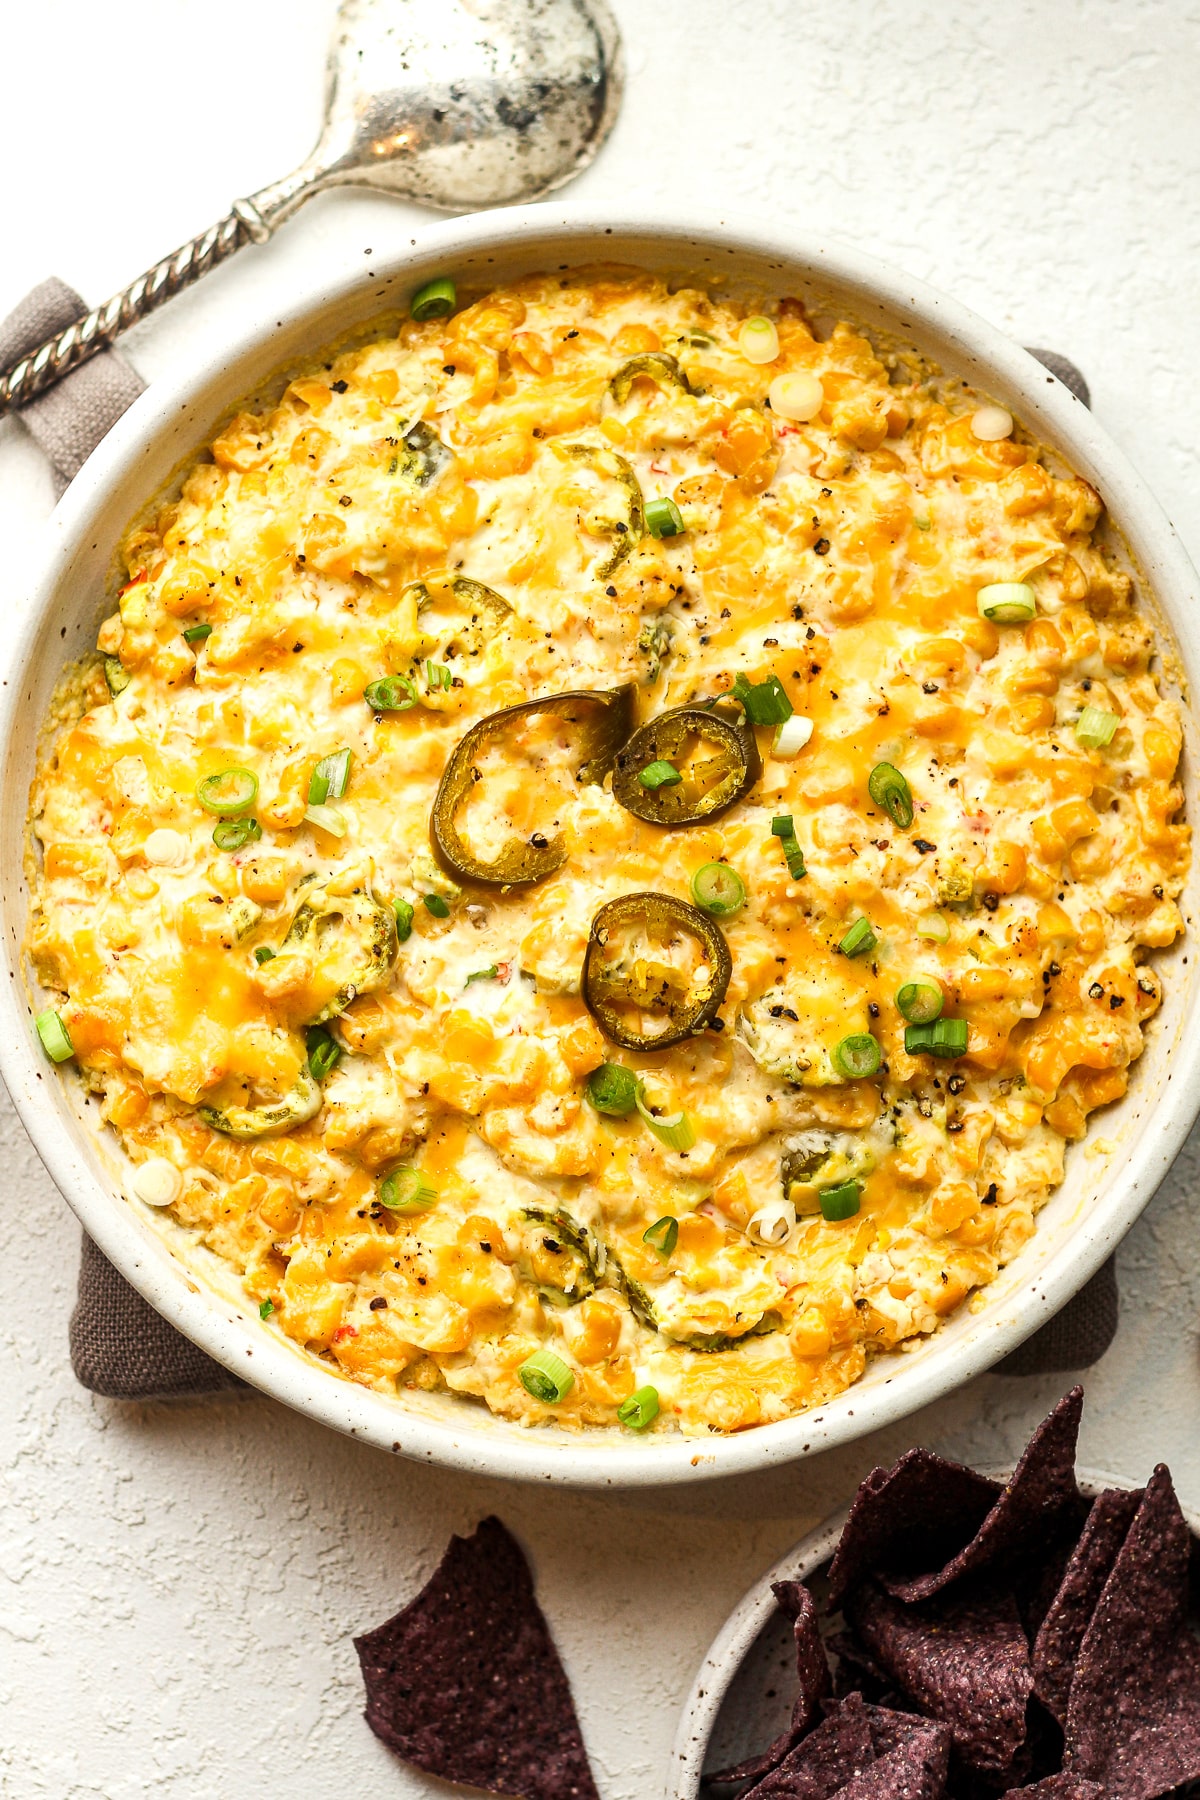 A bowl of corn dip with sour cream and jalapeños.